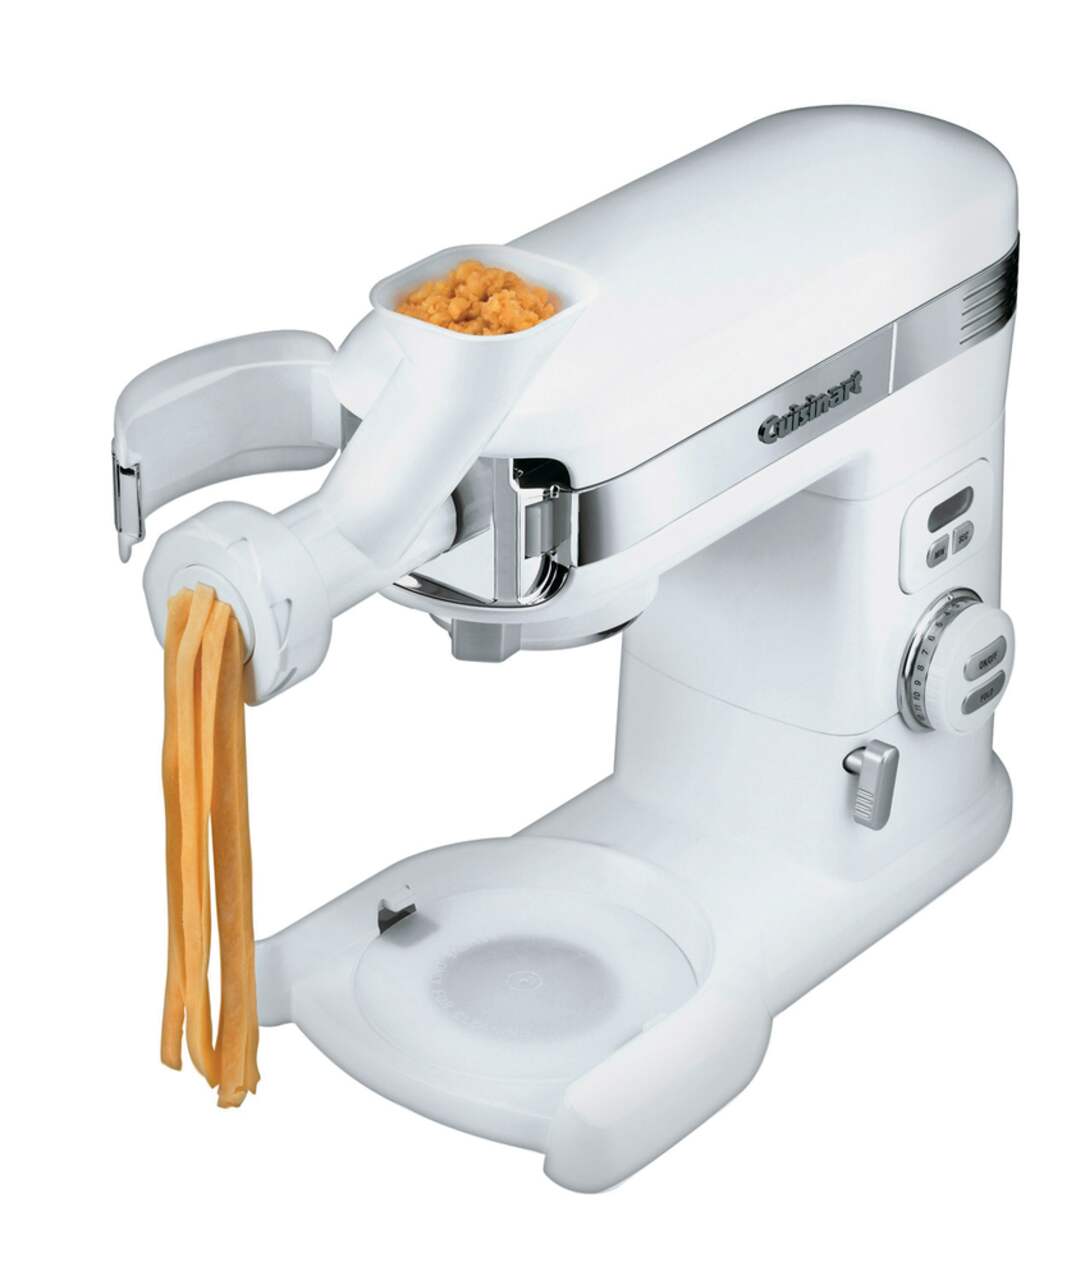 https://media-www.canadiantire.ca/product/living/kitchen/kitchen-appliances/0432185/cuisinart-pasta-maker-small-7ac7941a-6cec-4ee2-965f-a043c544d80f.png?imdensity=1&imwidth=640&impolicy=mZoom